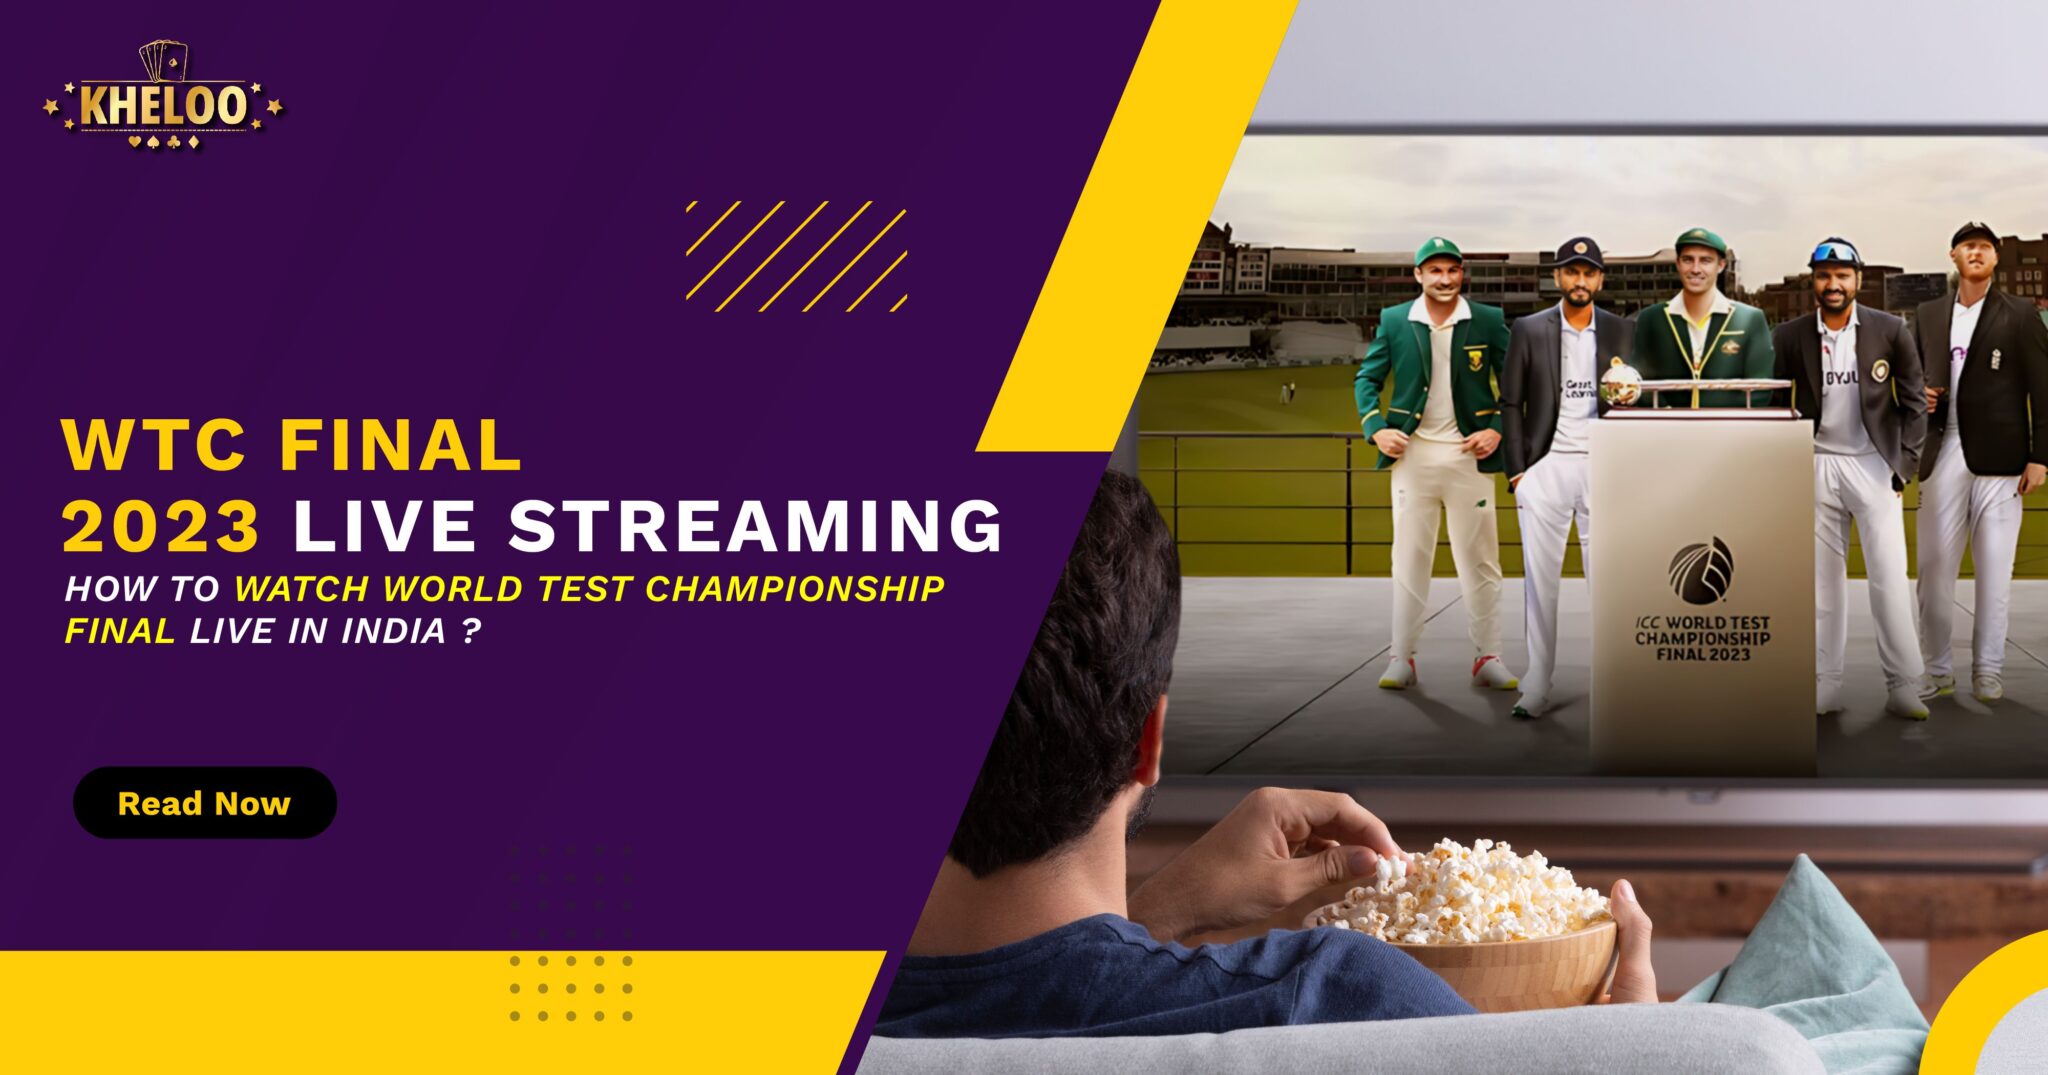 WTC final 2023 live streaming, How to watch World Test Championship